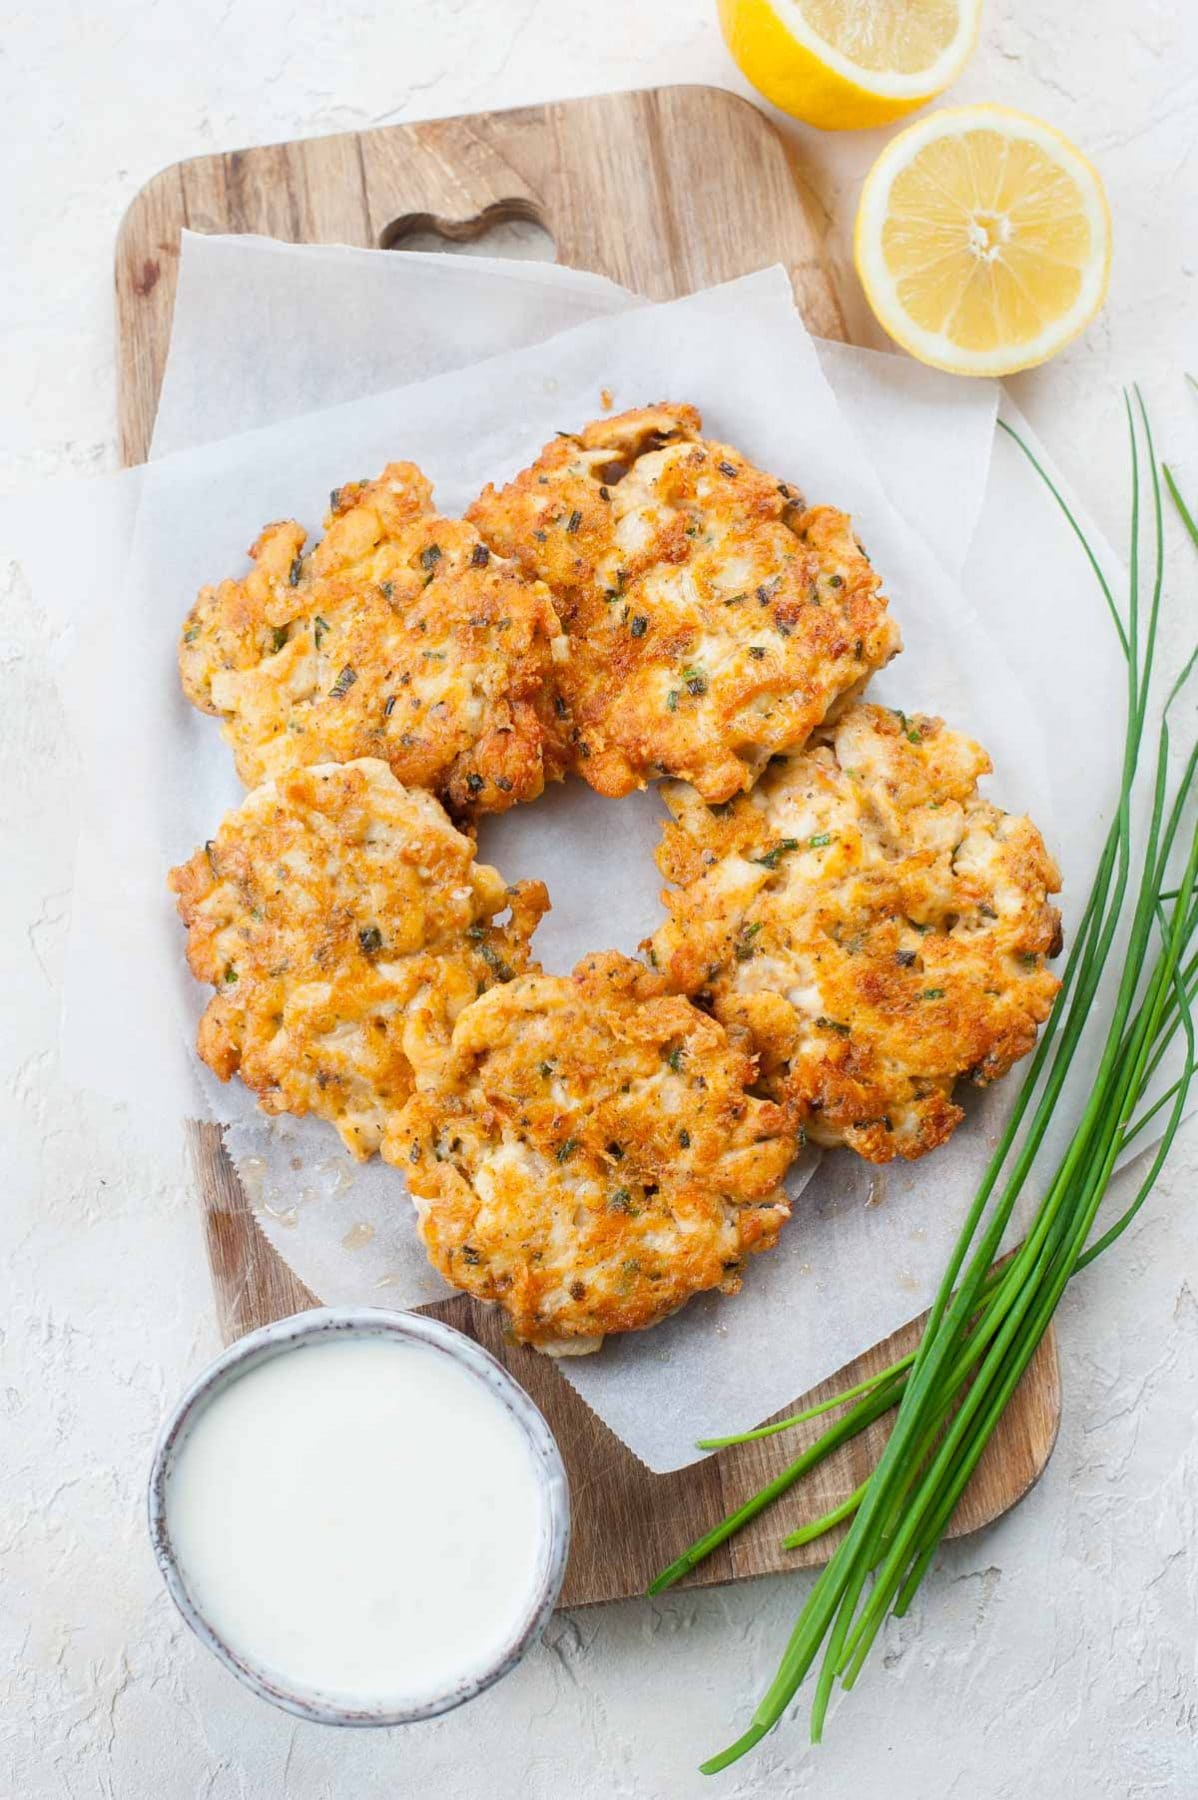 cheesy chicken fritters on a wooden board, surrounded with chives and lemon halves